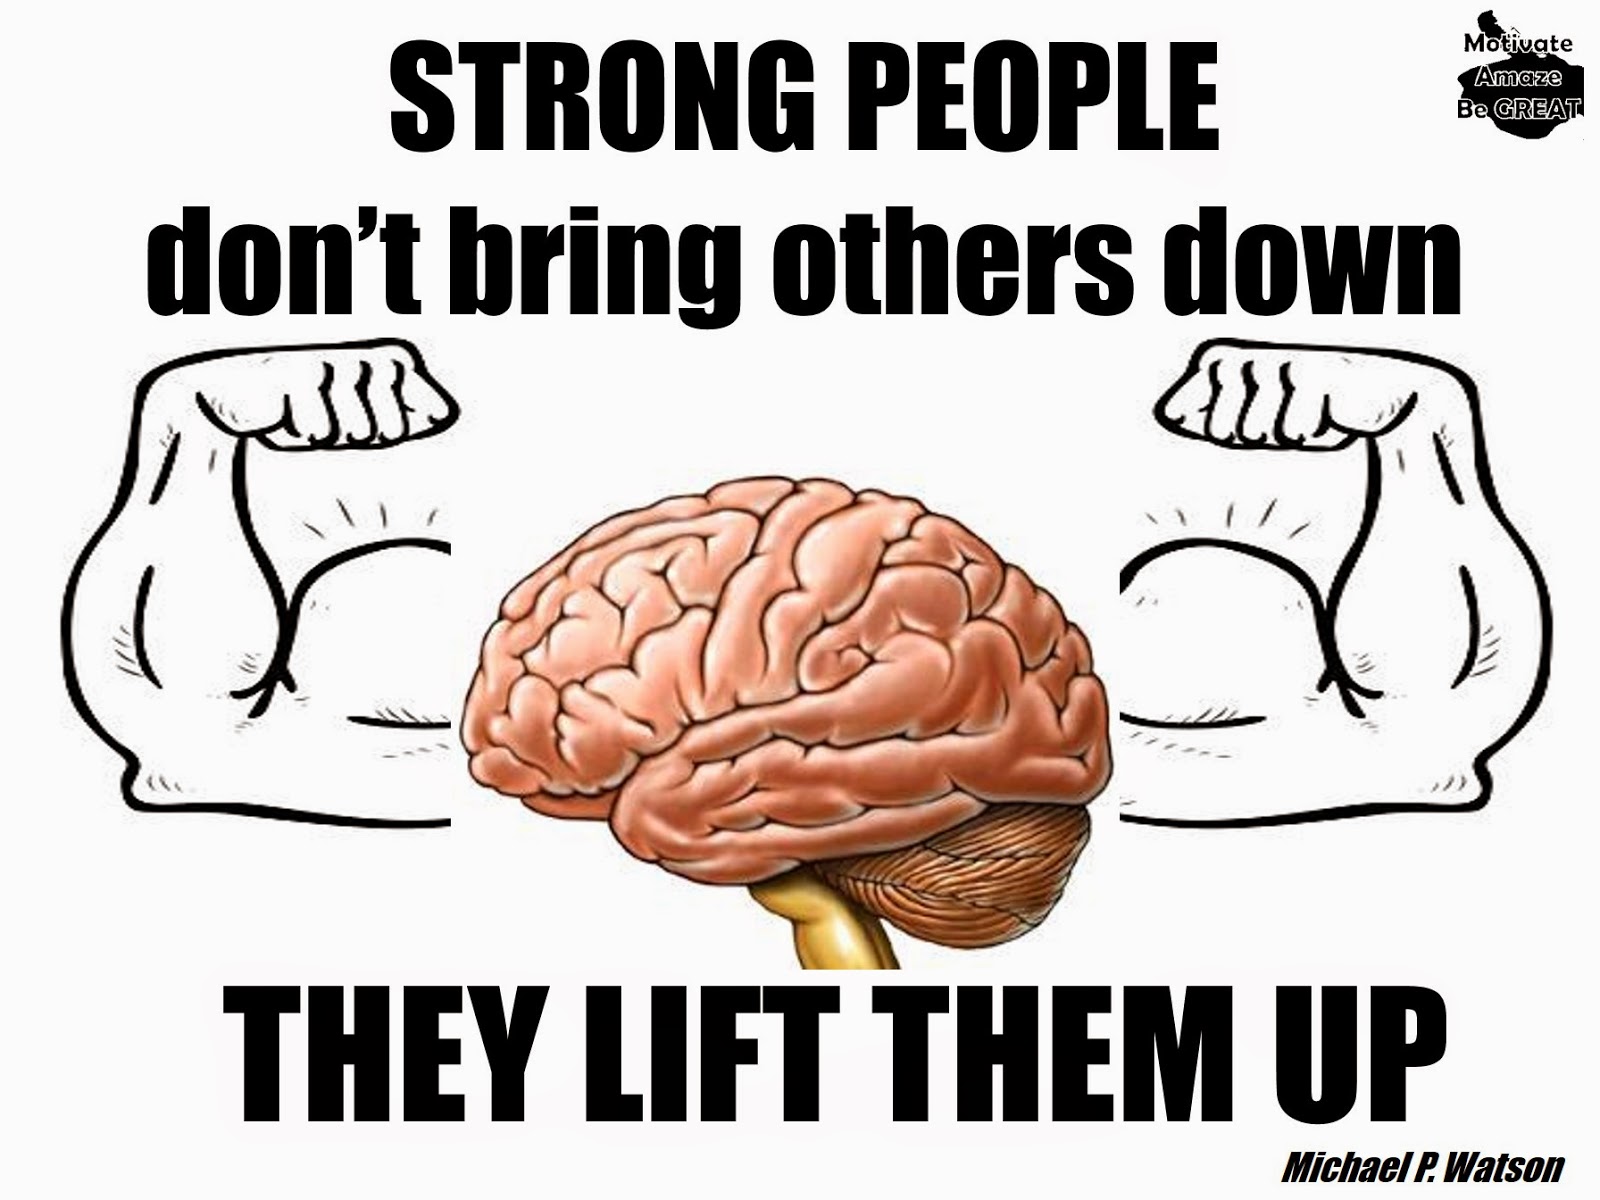 "Strong people don't bring others down, they lift them up," Michael P. Watson